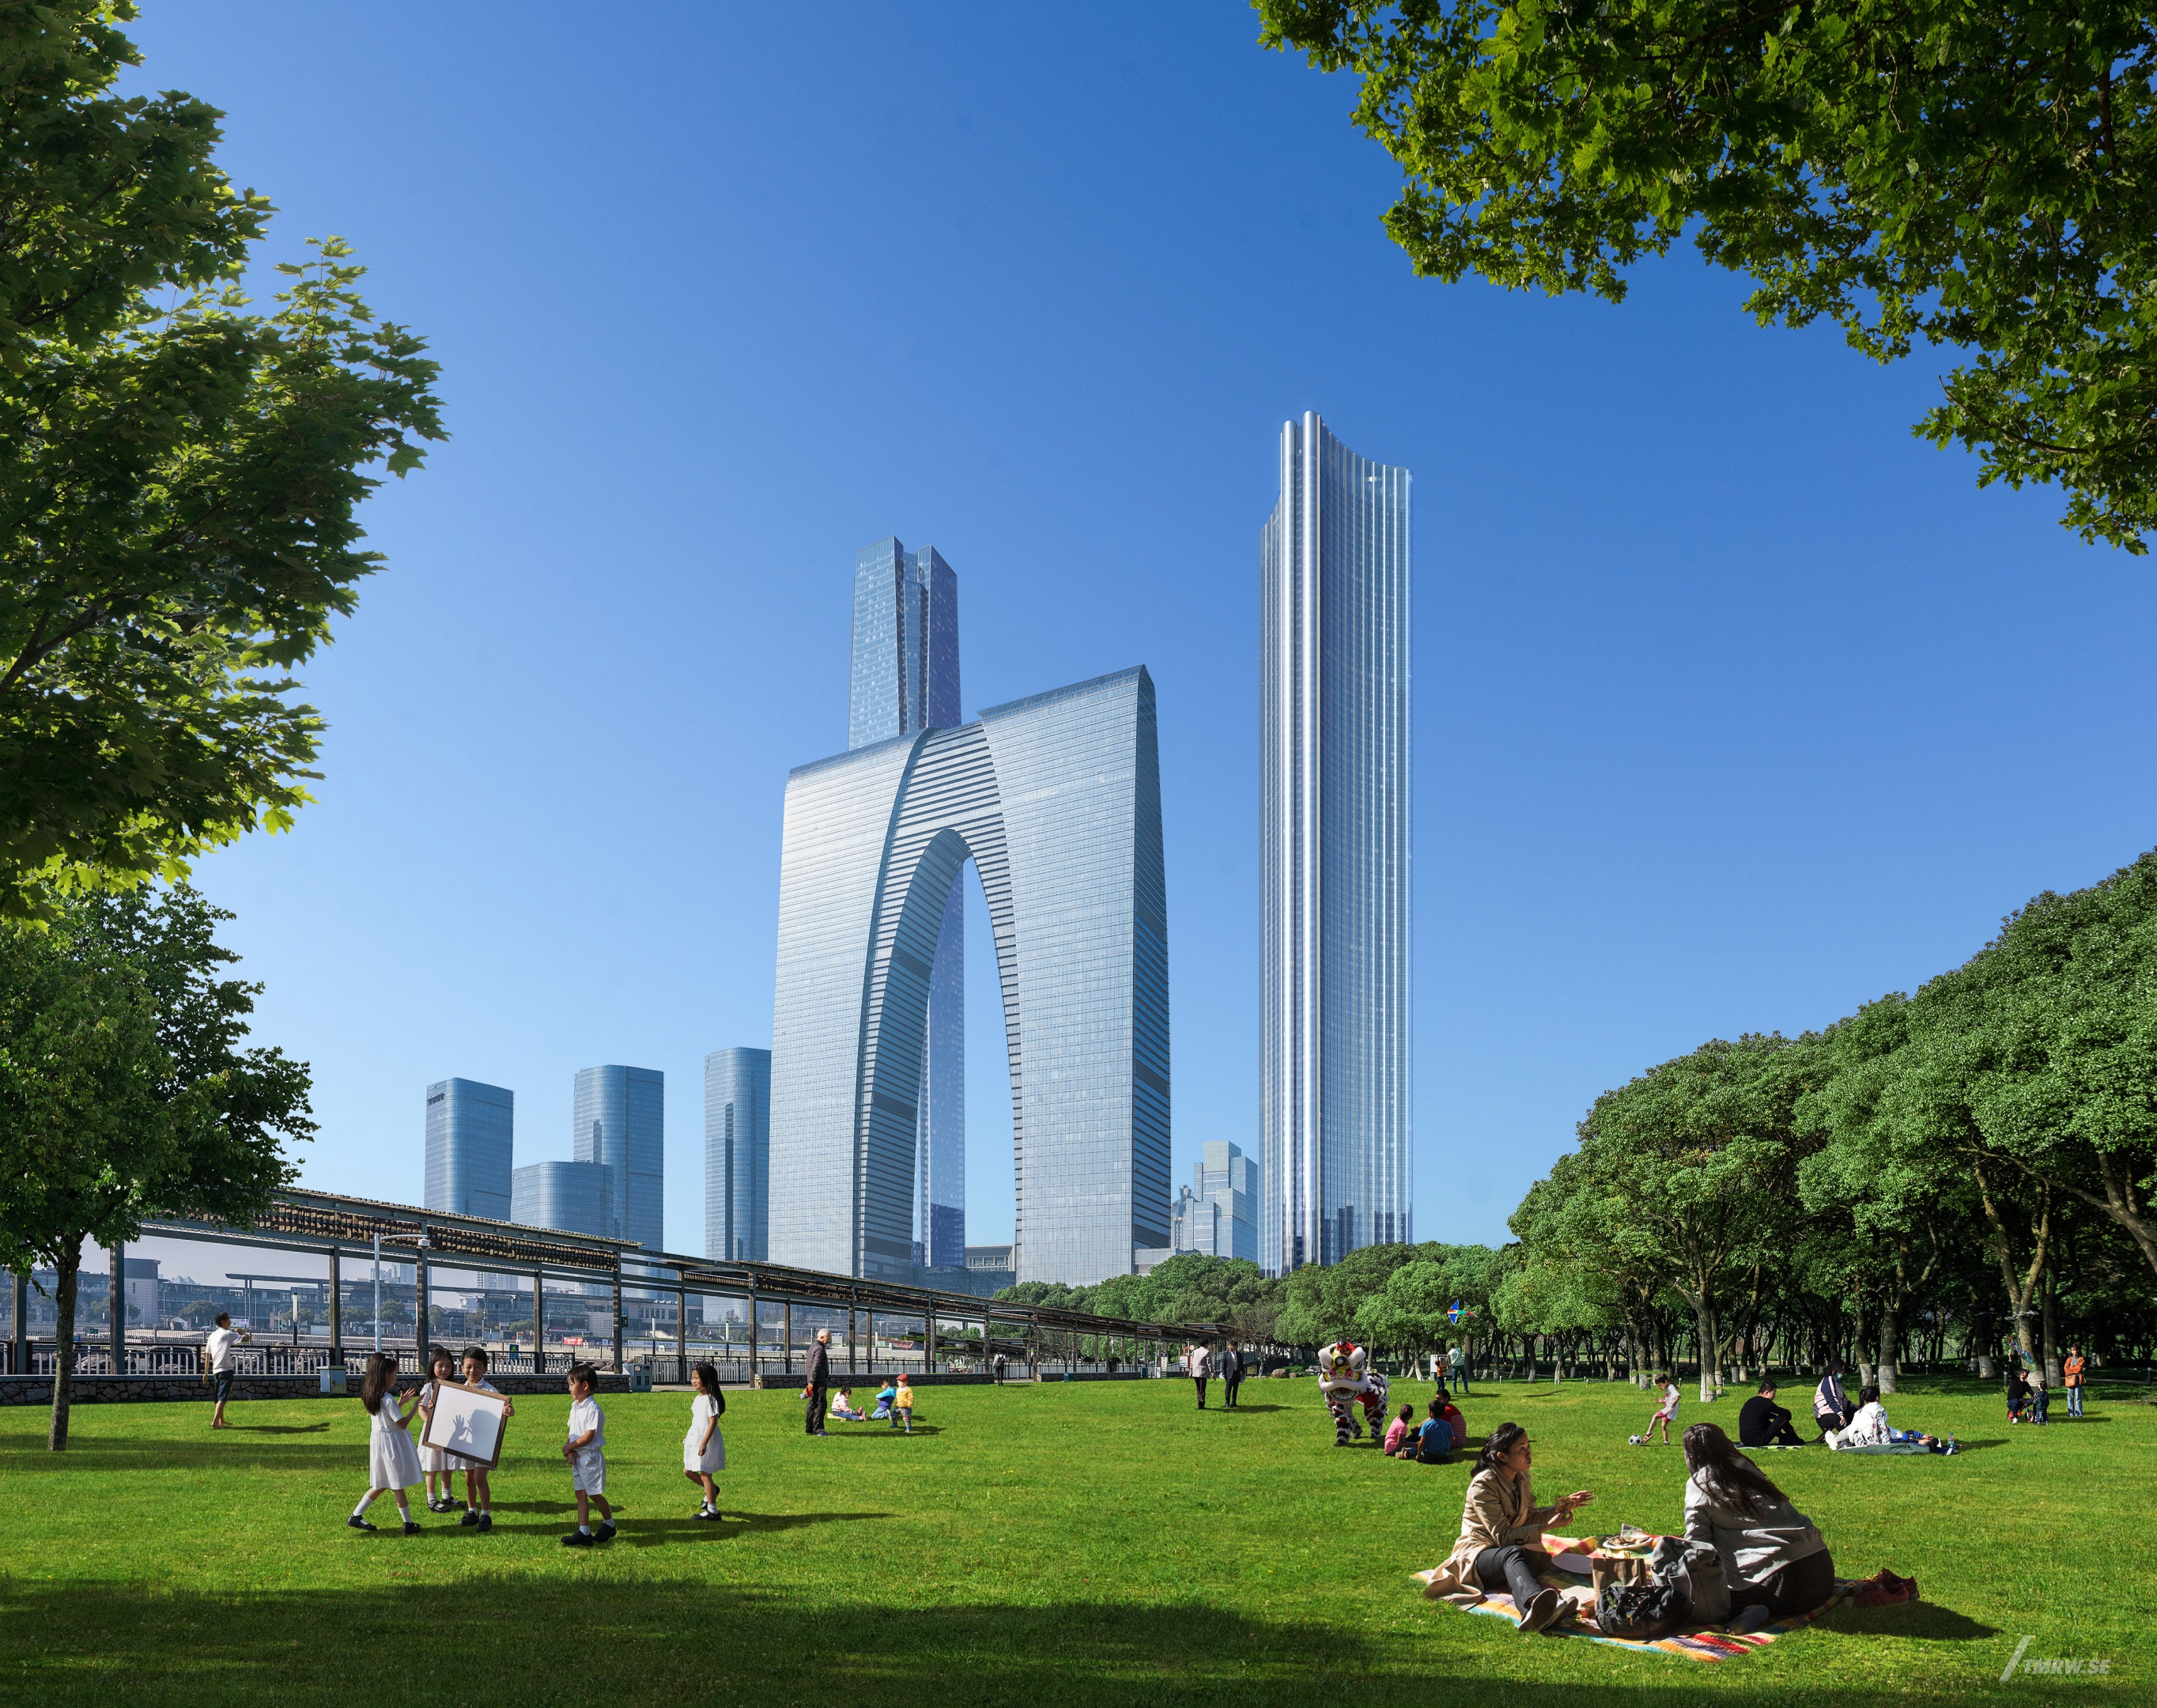 Architectural visualization of Coli Super Tower for Foster + Partners. An image of supertall skyscrapes in daylight from street view with a park infront.